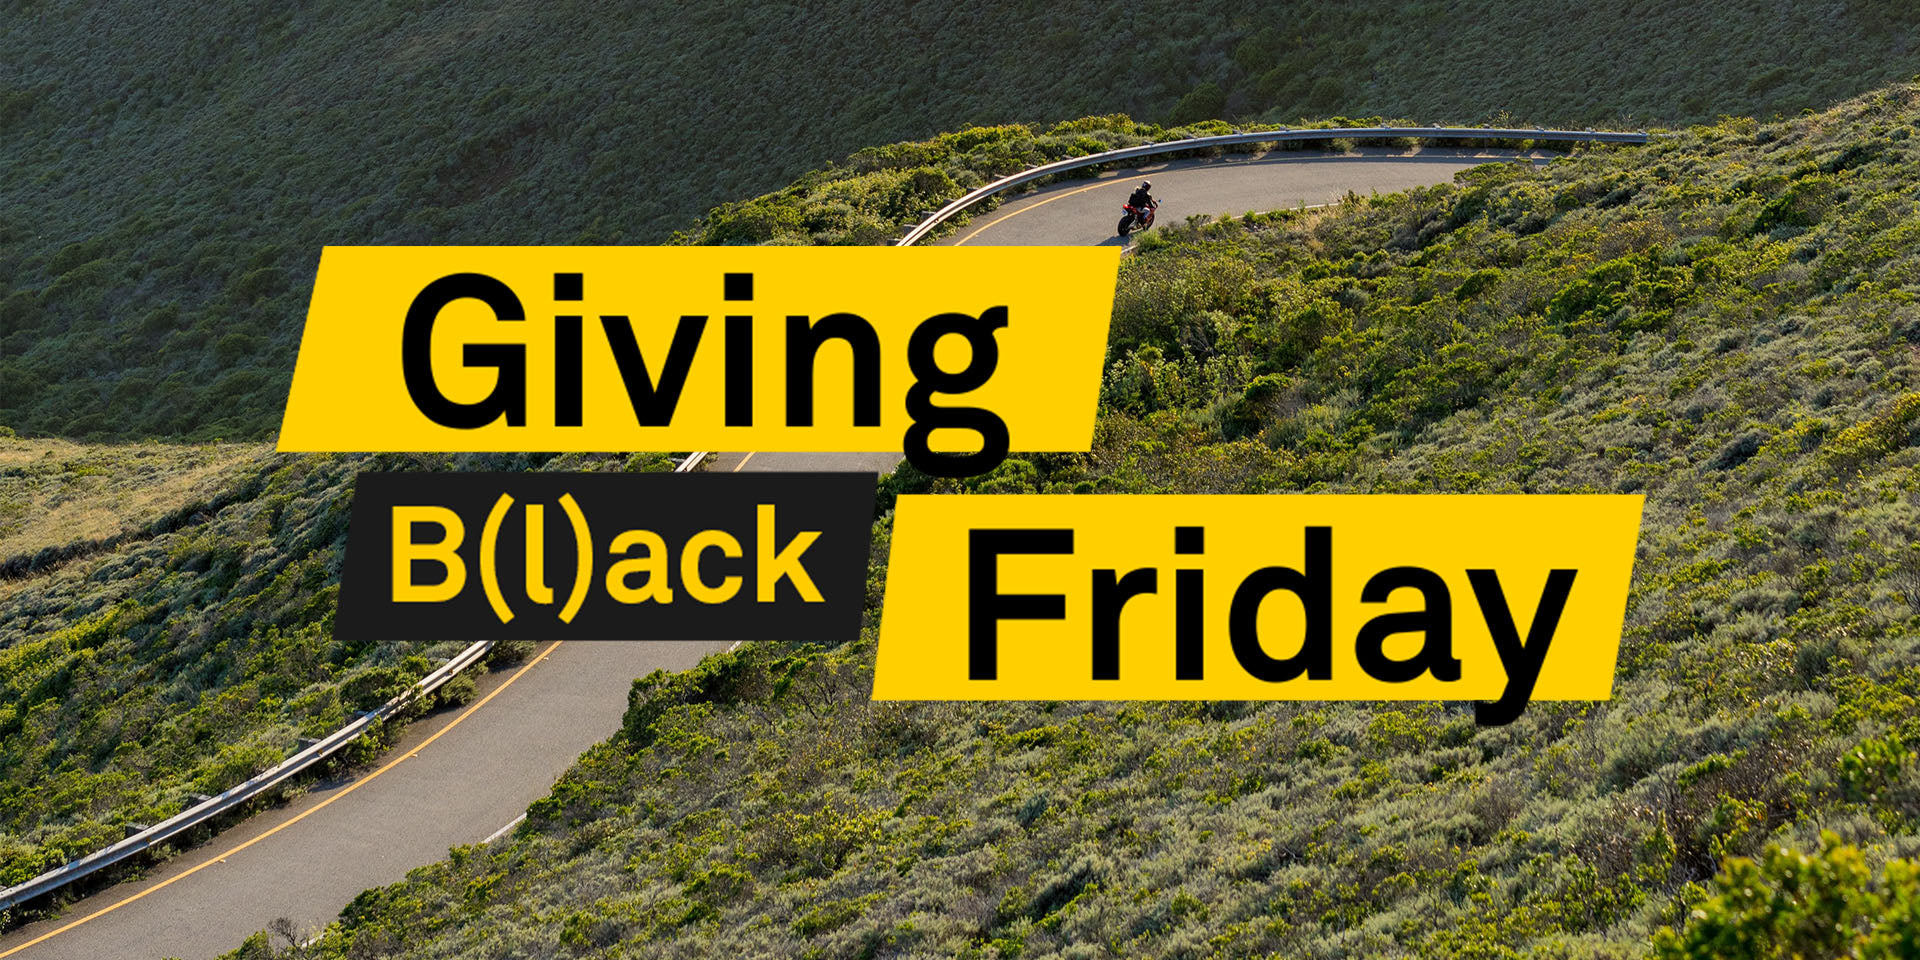 Giving B(l)ack Friday 2021: Vote for our motorcycling charity